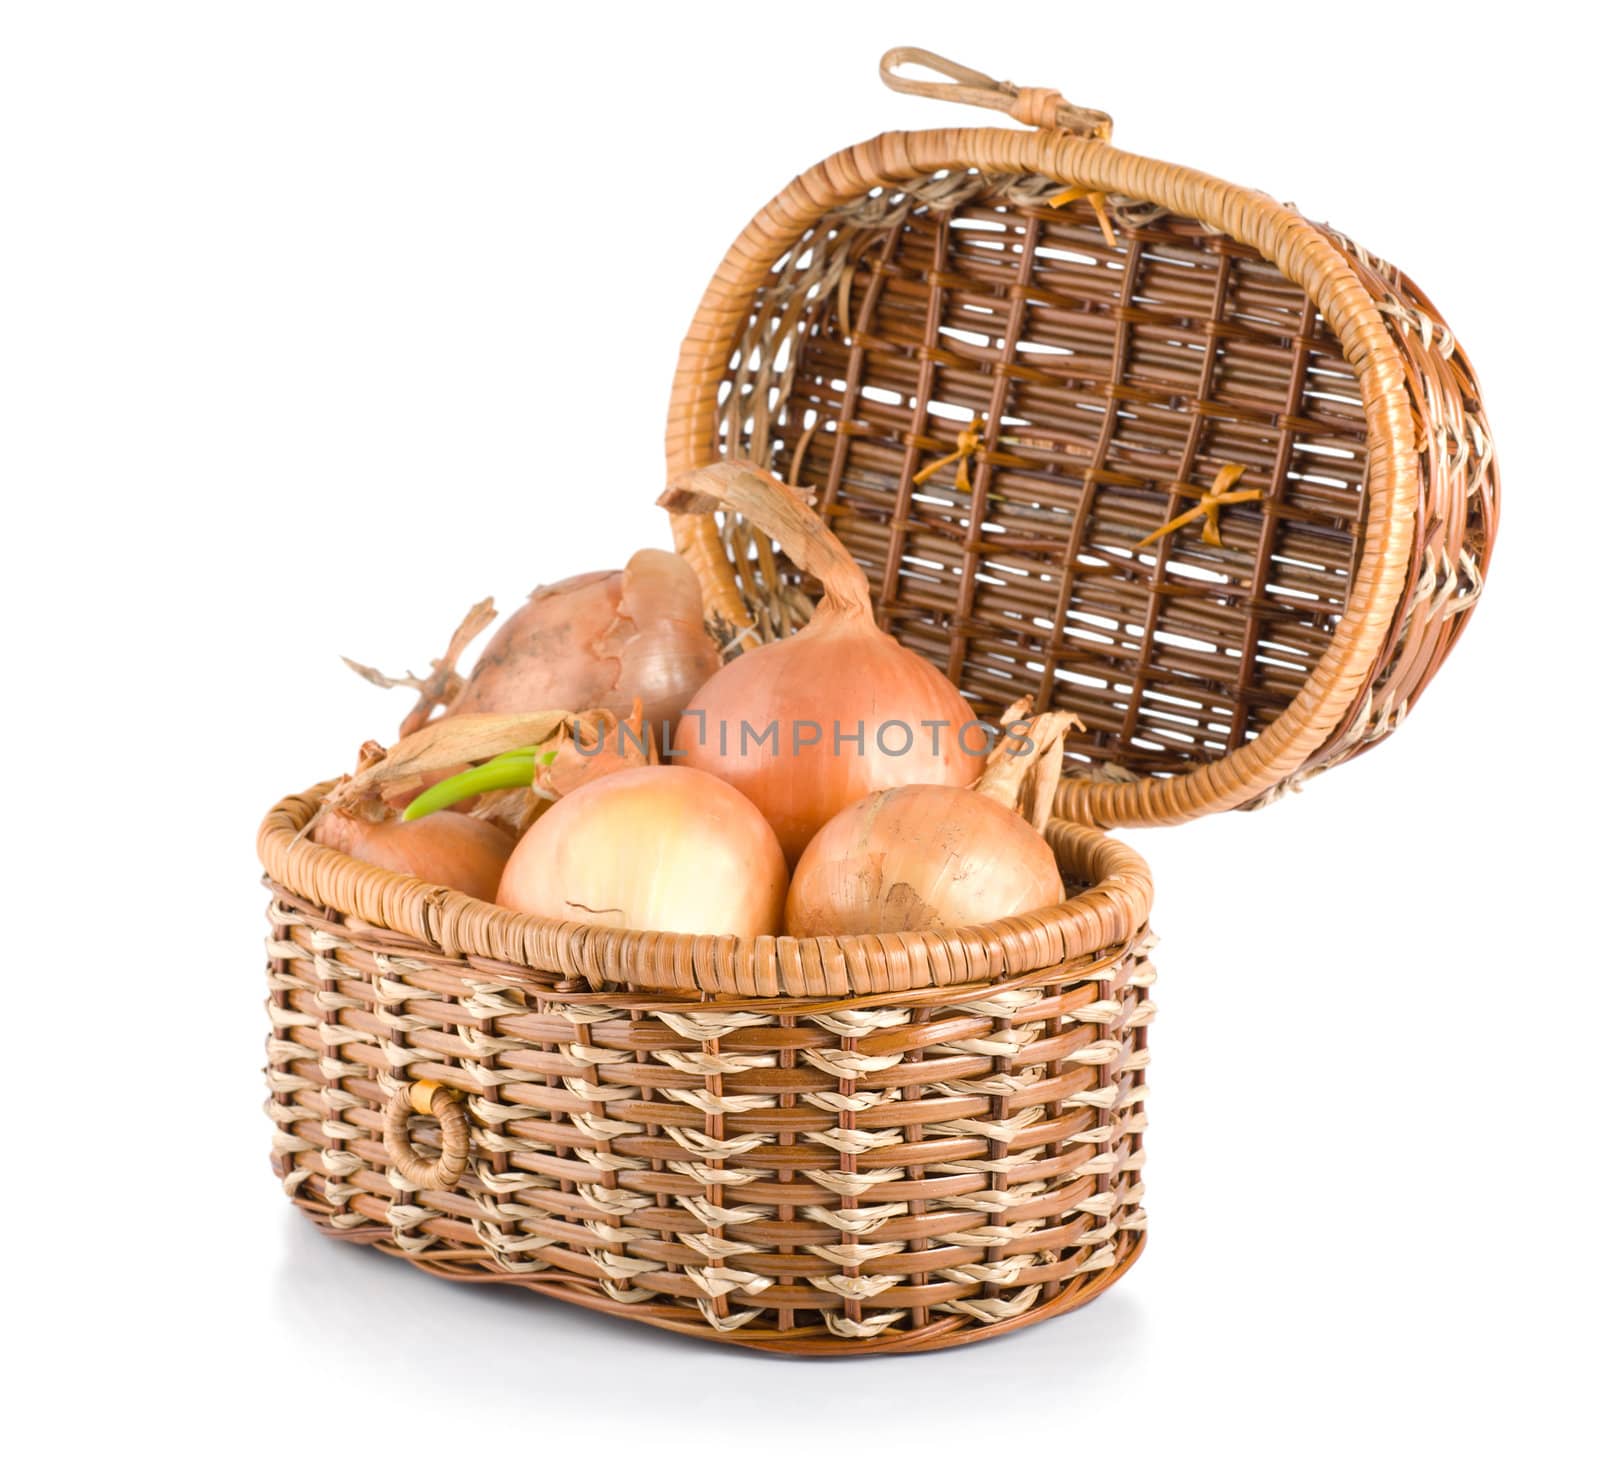 Onion in a wooden basket by Givaga